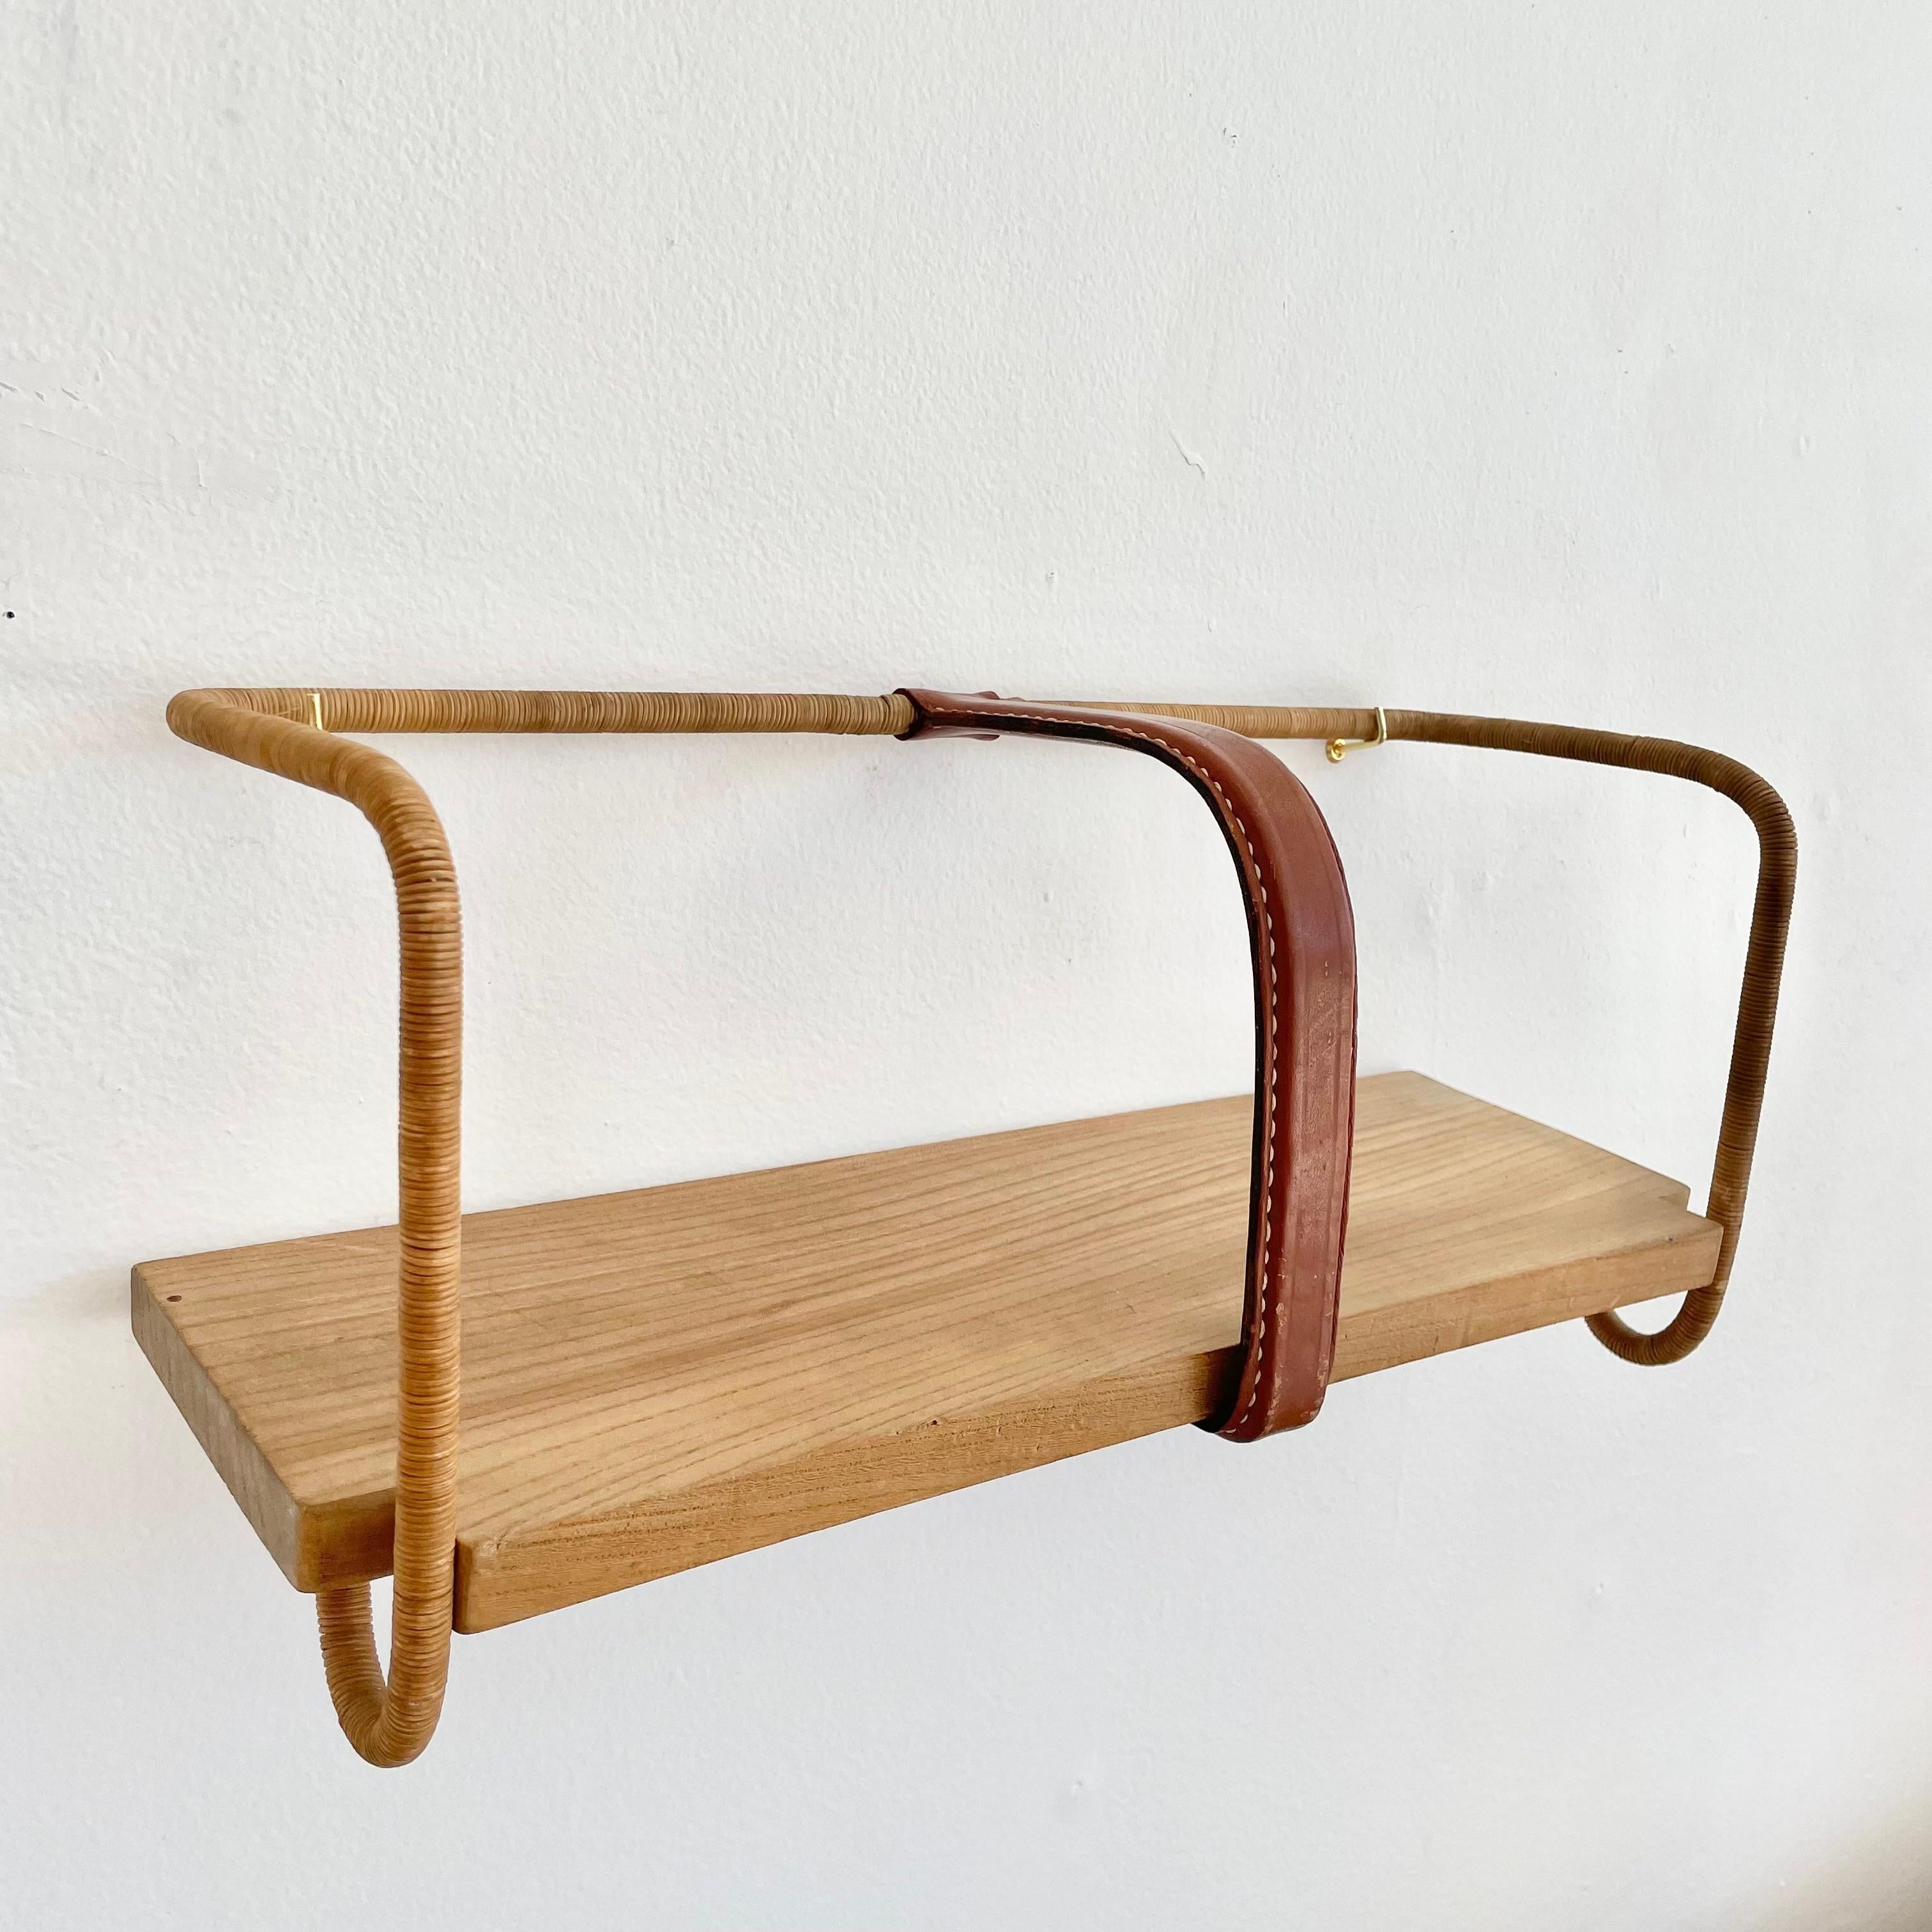 Art Deco Jacques Adnet Leather, Wood and Twine Shelf, 1950s France For Sale